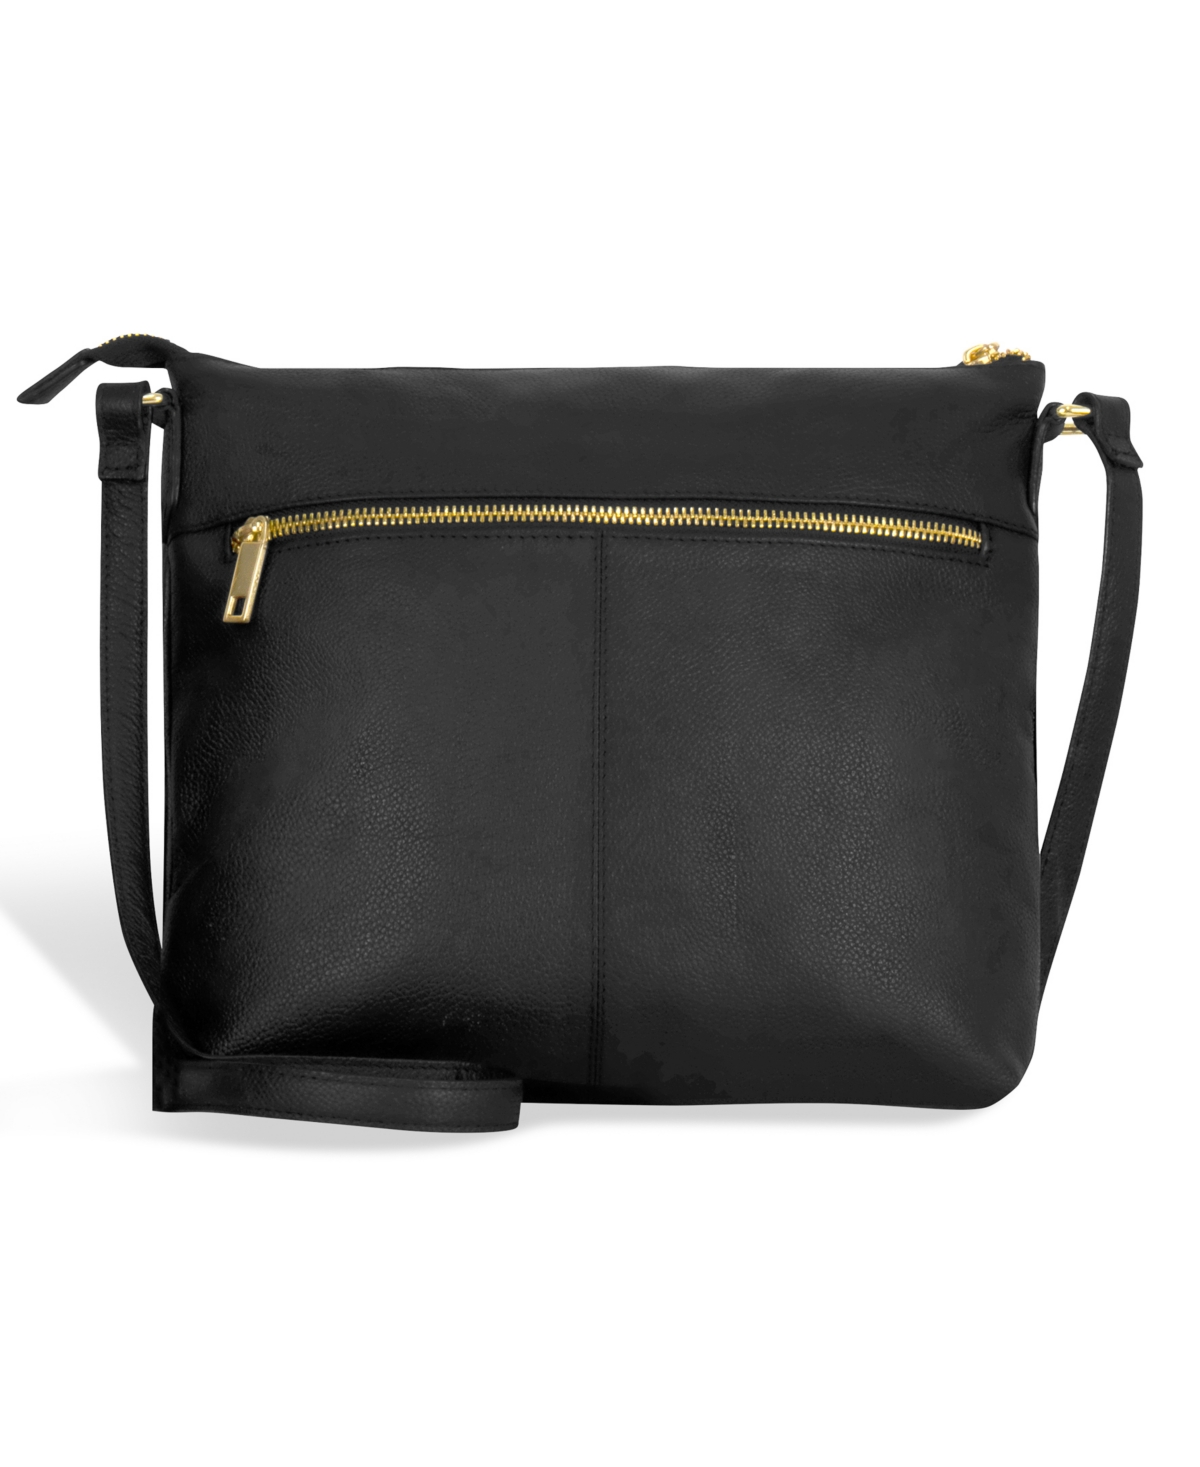 Shop Champs Leather Crossbody Bag In Black